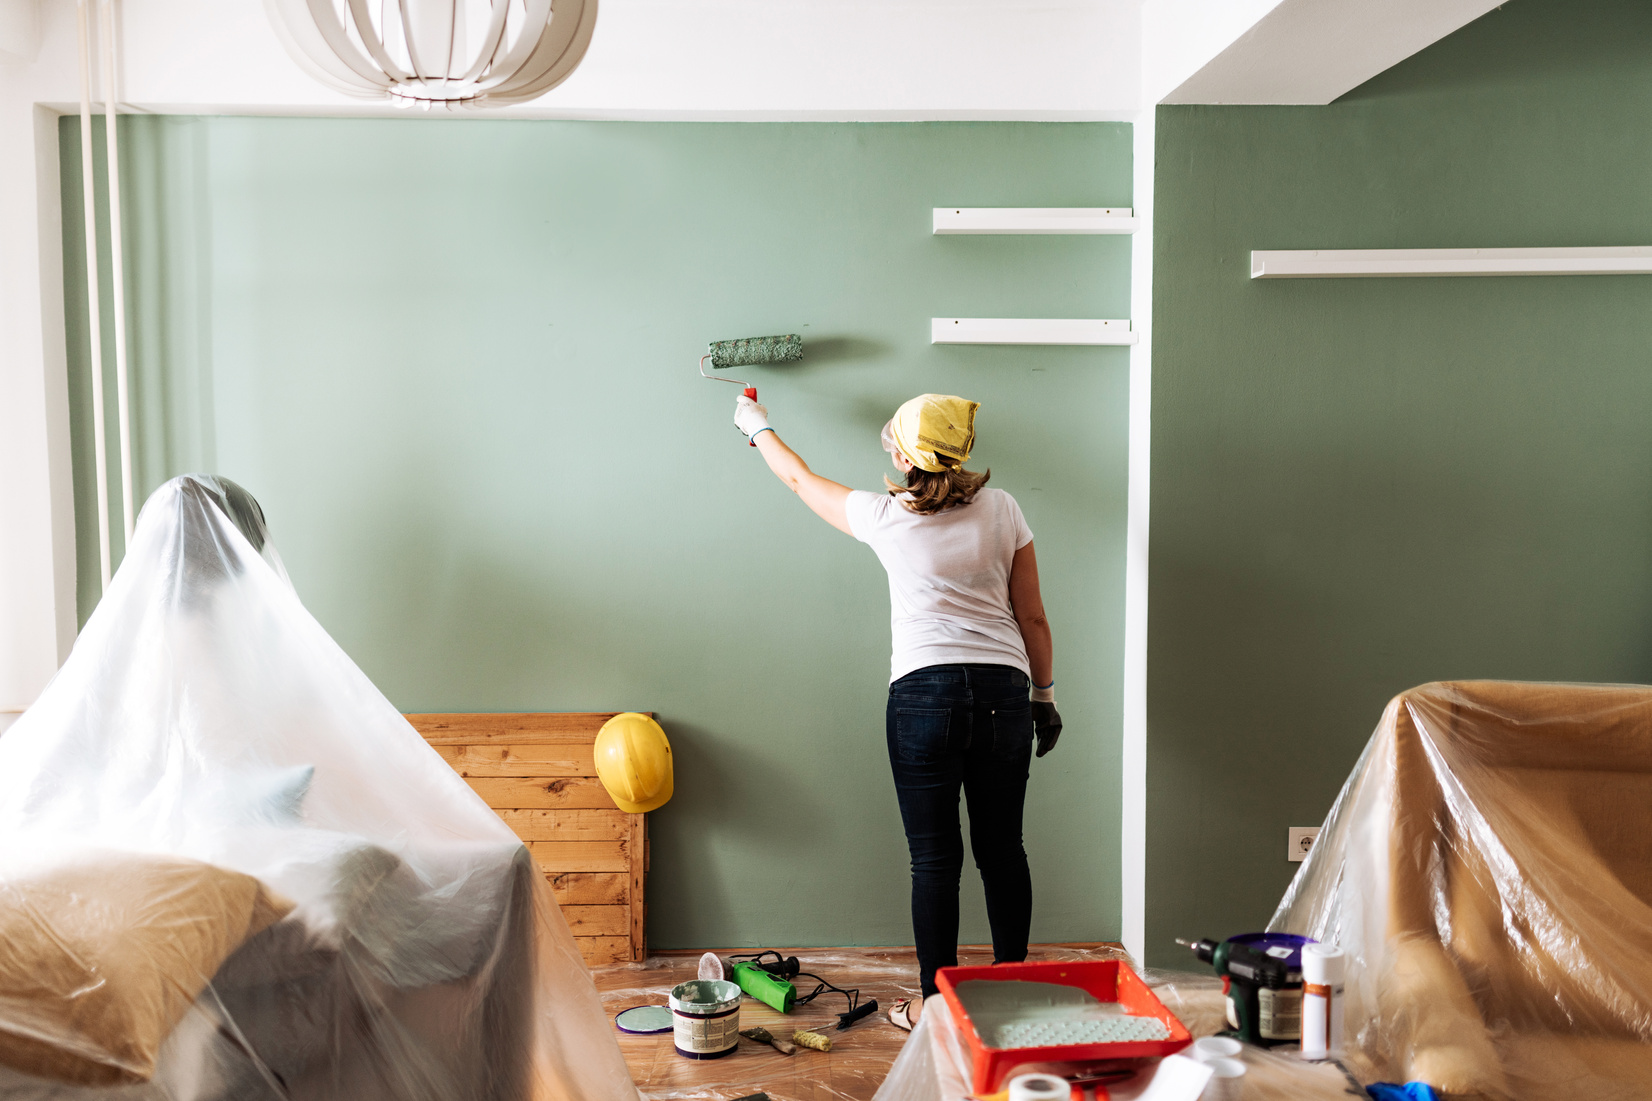 Home improvement and painting the walls at home